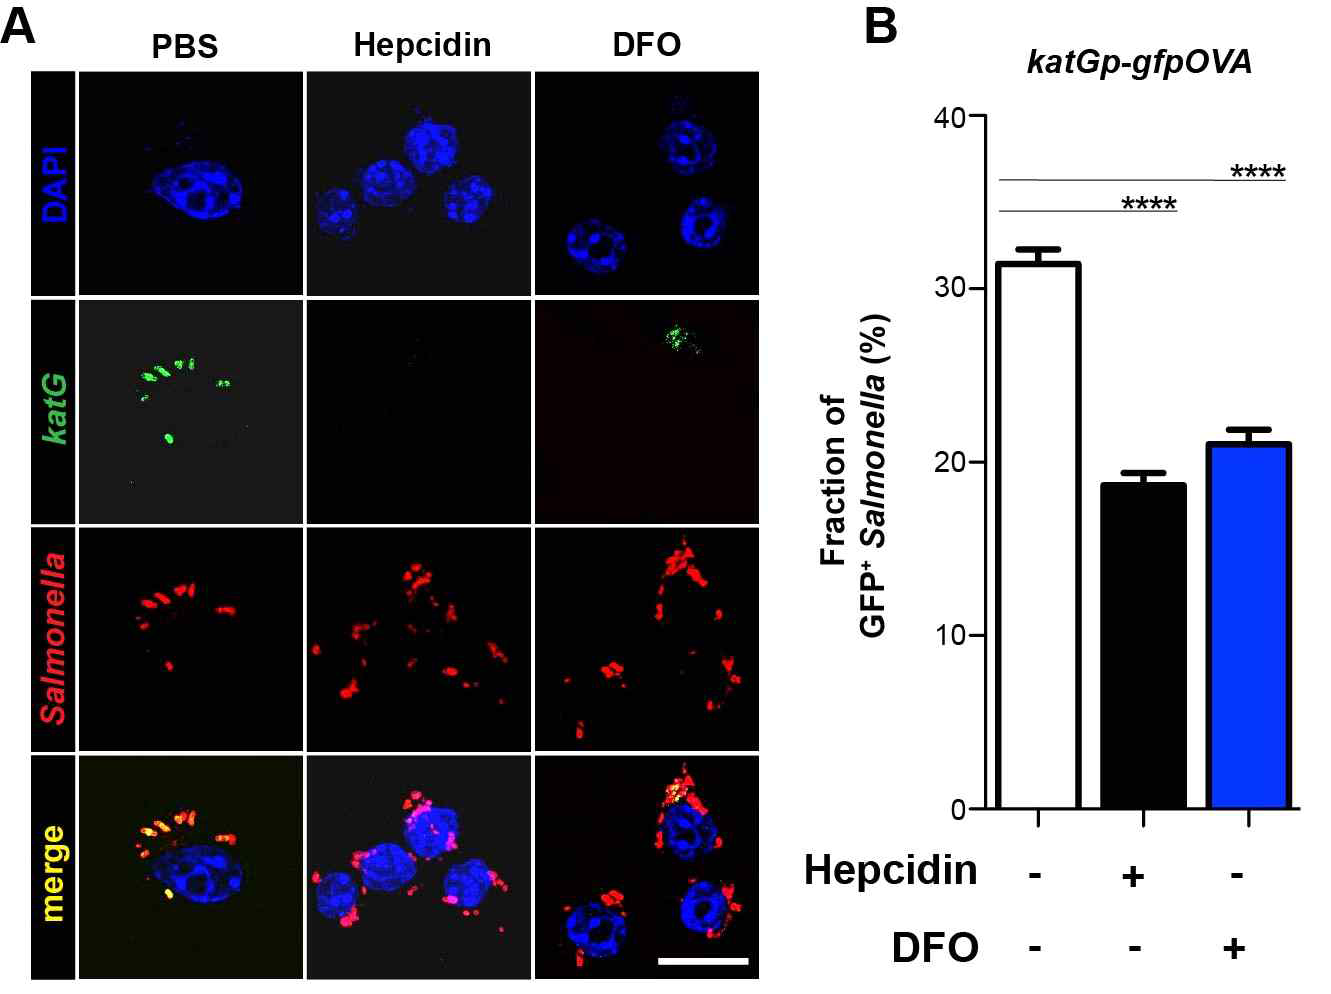 Expression of katGp-gfpOVA in the Salmonella infecting RAW264.7 cells pretreated with PBS, hepcidin (1 g/ml), or DFO (100mM). Images were taken 2hr p.i. using confocal microscope (A) and quantification (B)